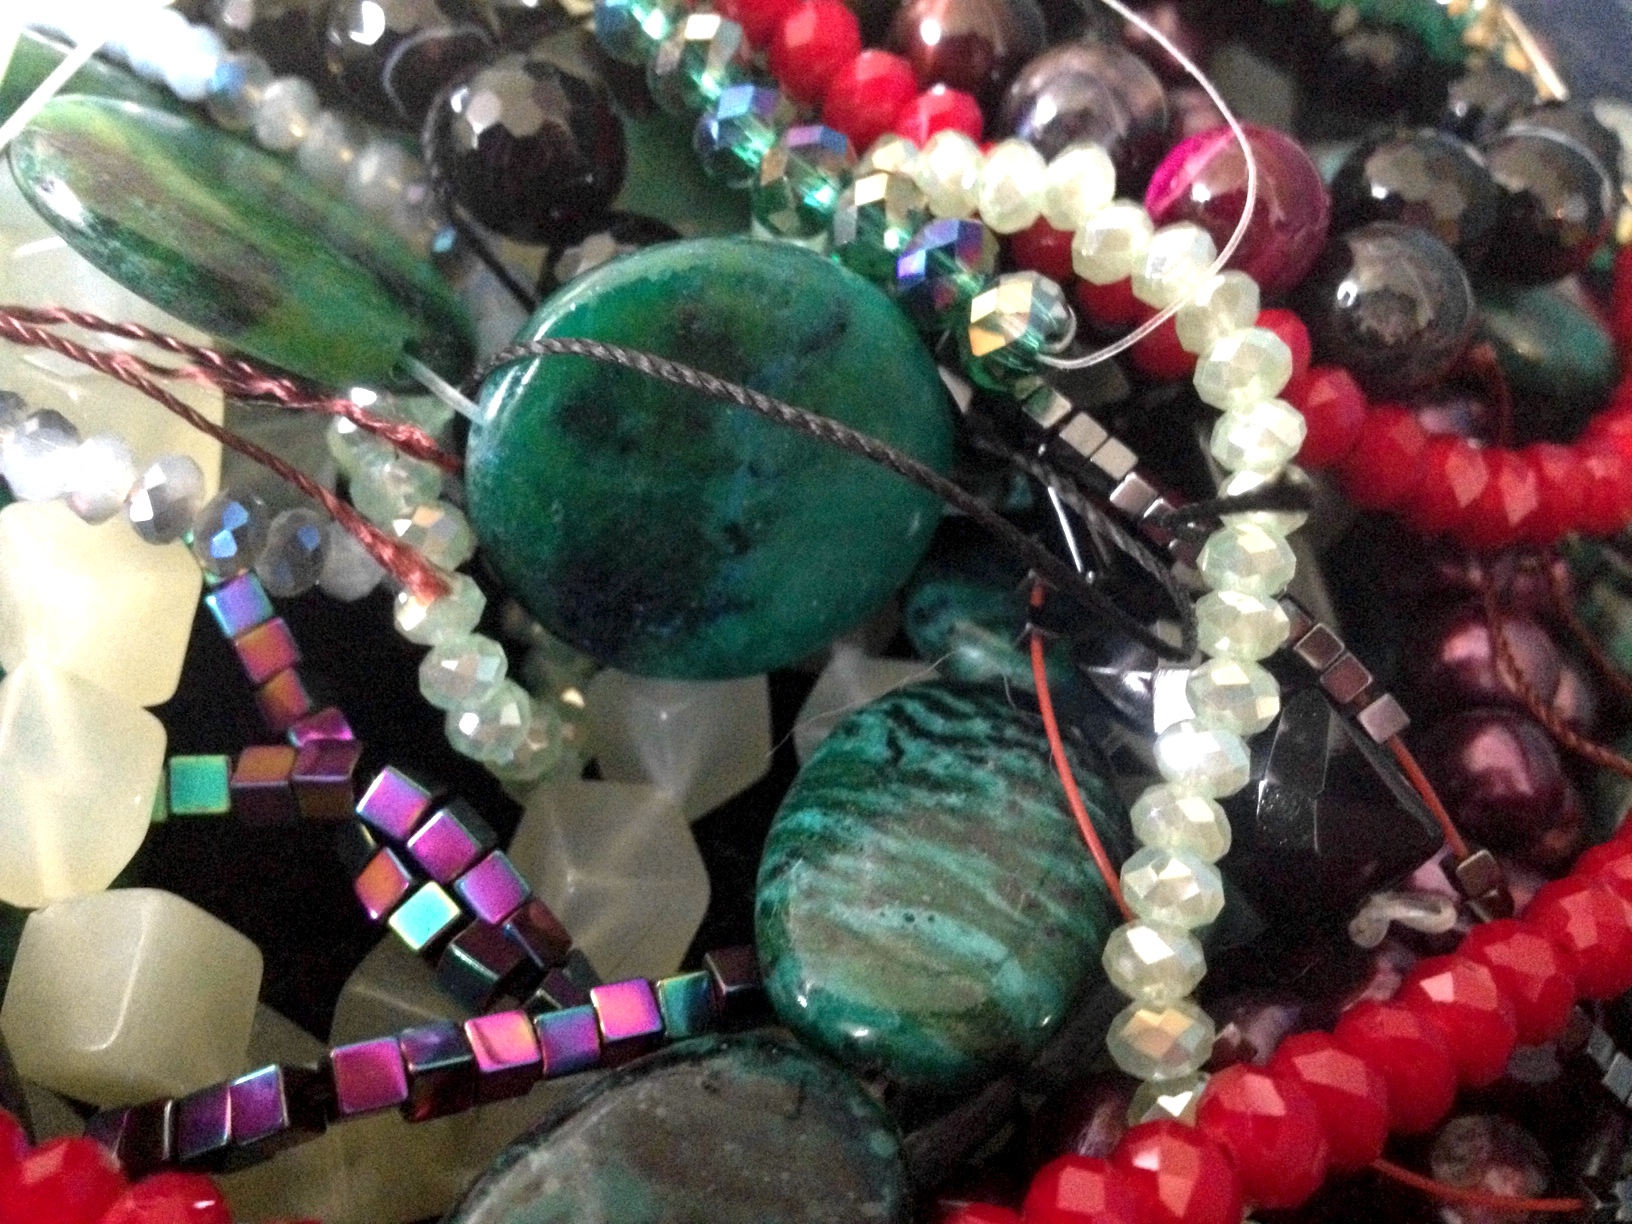 Buying Wholesale Jewelry Supplies - Do's and Don'ts – Puritybeads